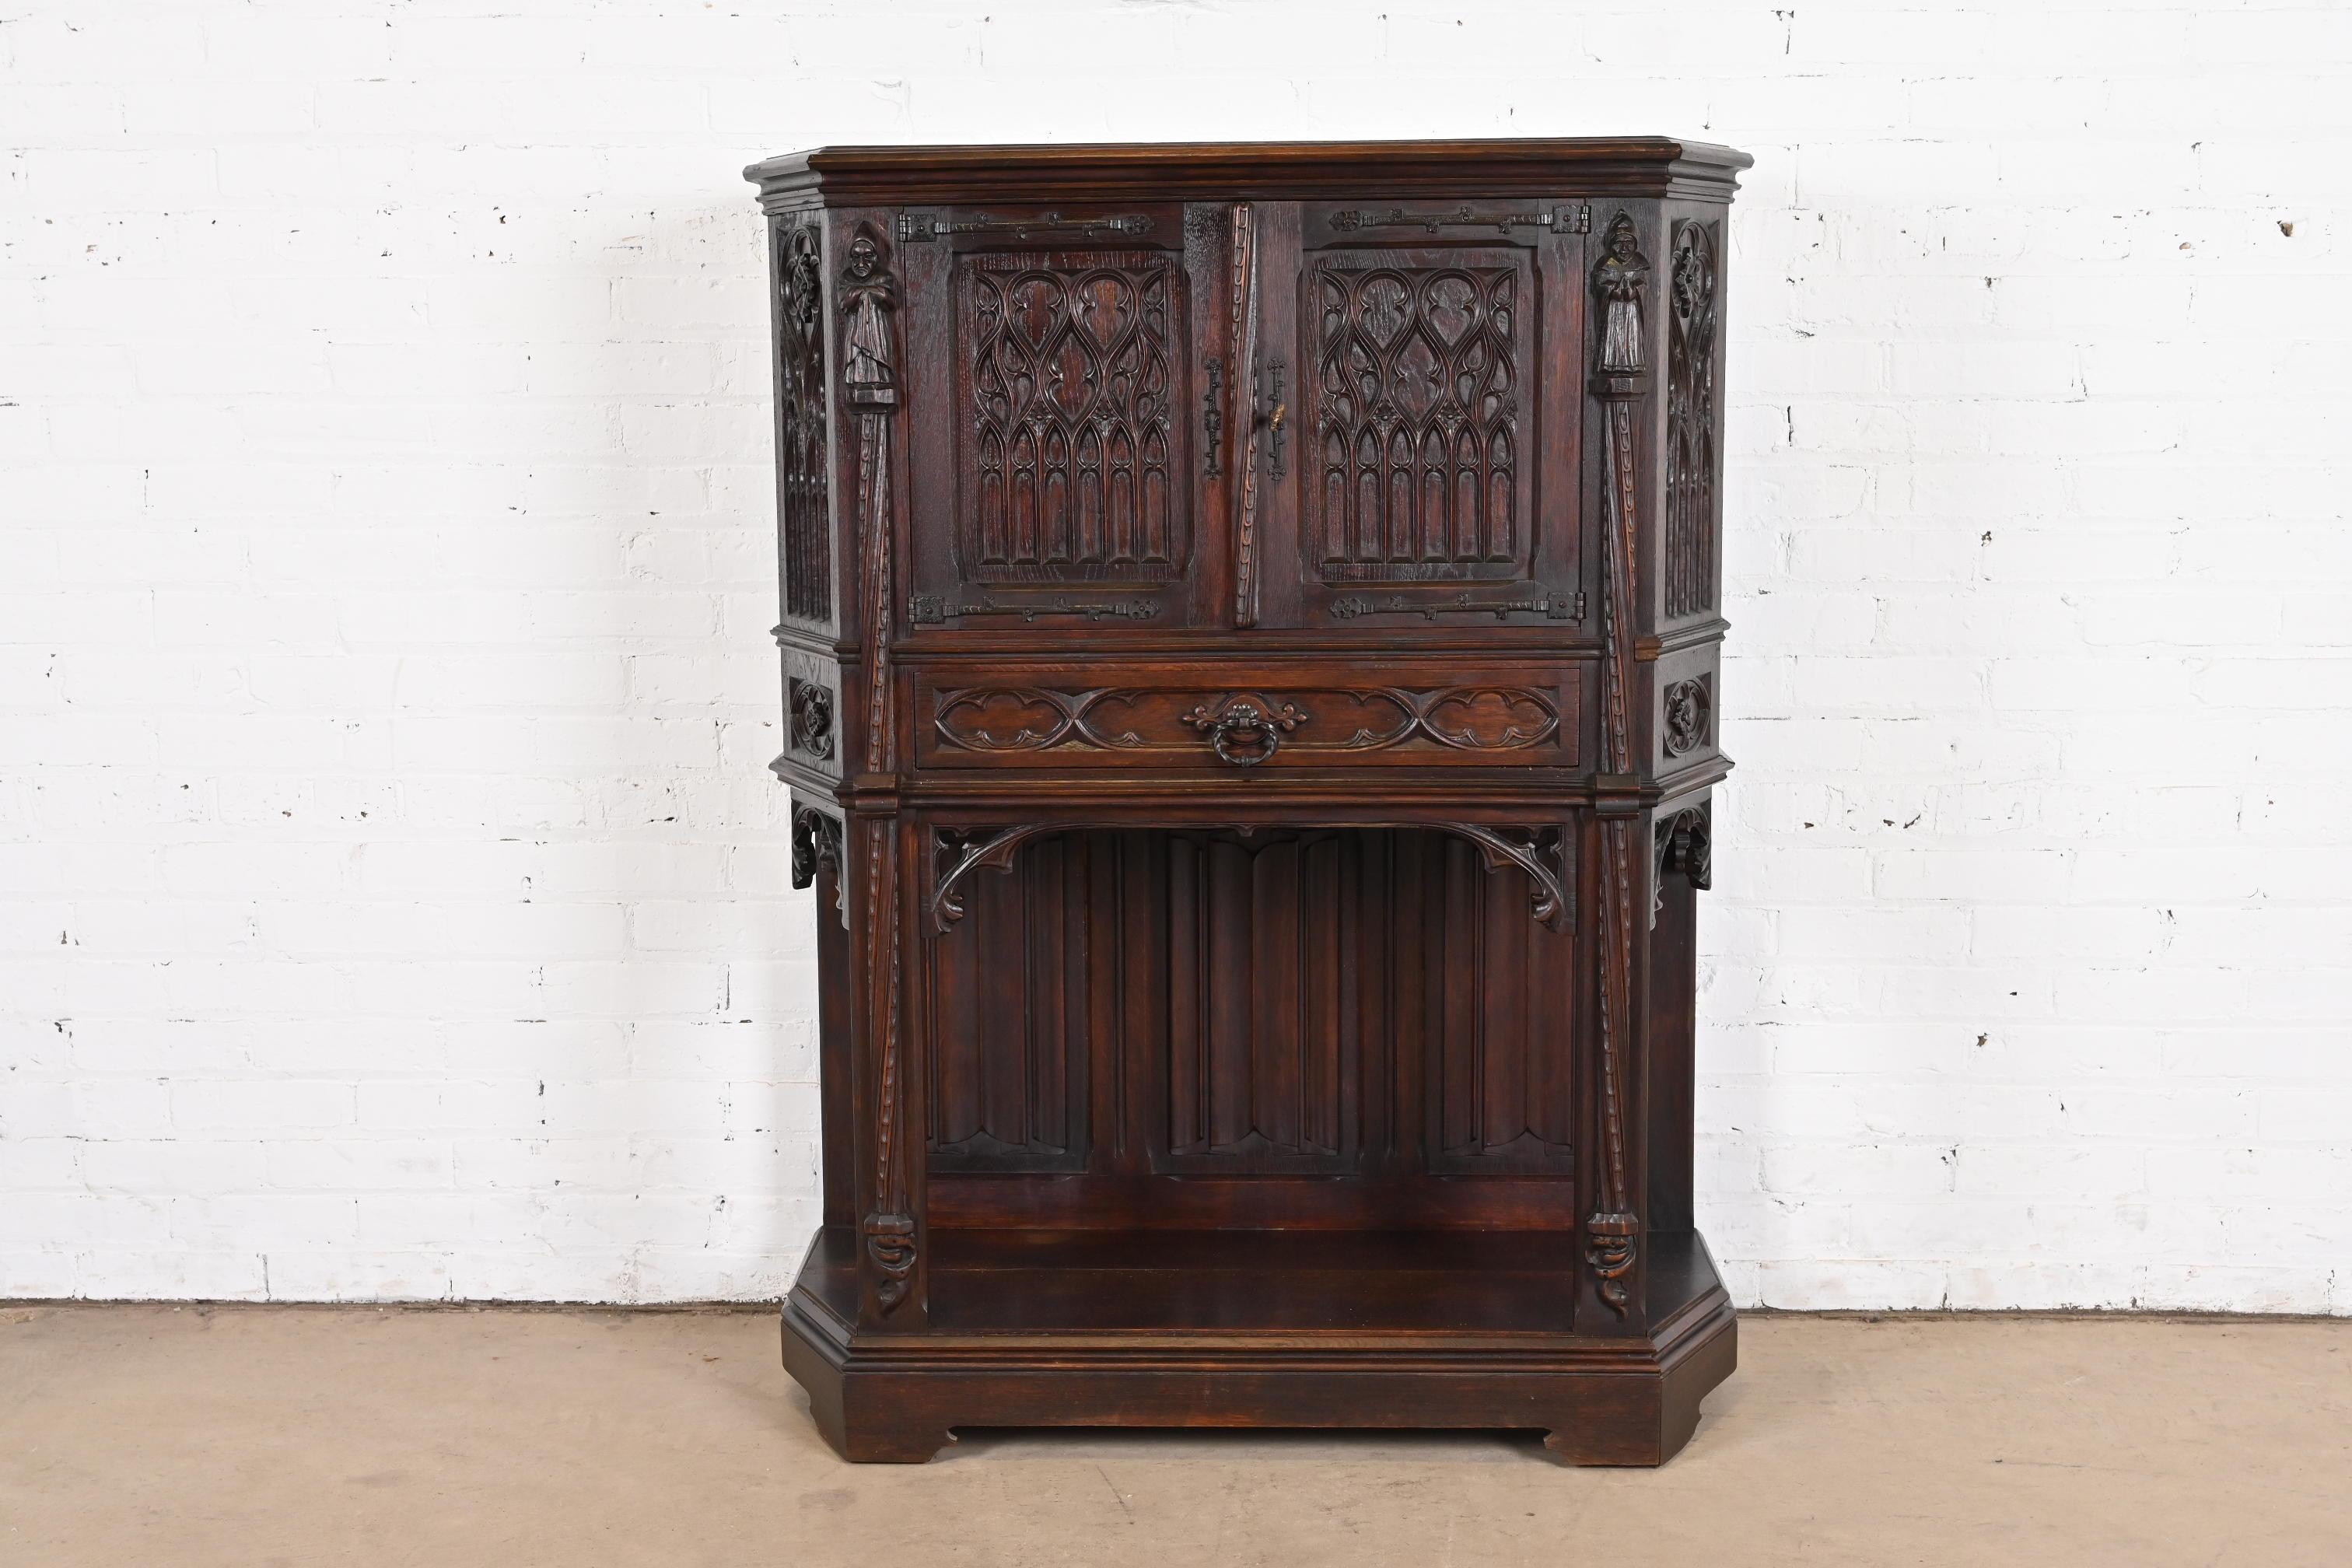 A gorgeous antique Gothic or Renaissance Revival bar cabinet

In the manner of R.J. Horner

Belgium, Circa Late 19th Century

Carved dark oak, with original iron hardware.

Measures: 39.25